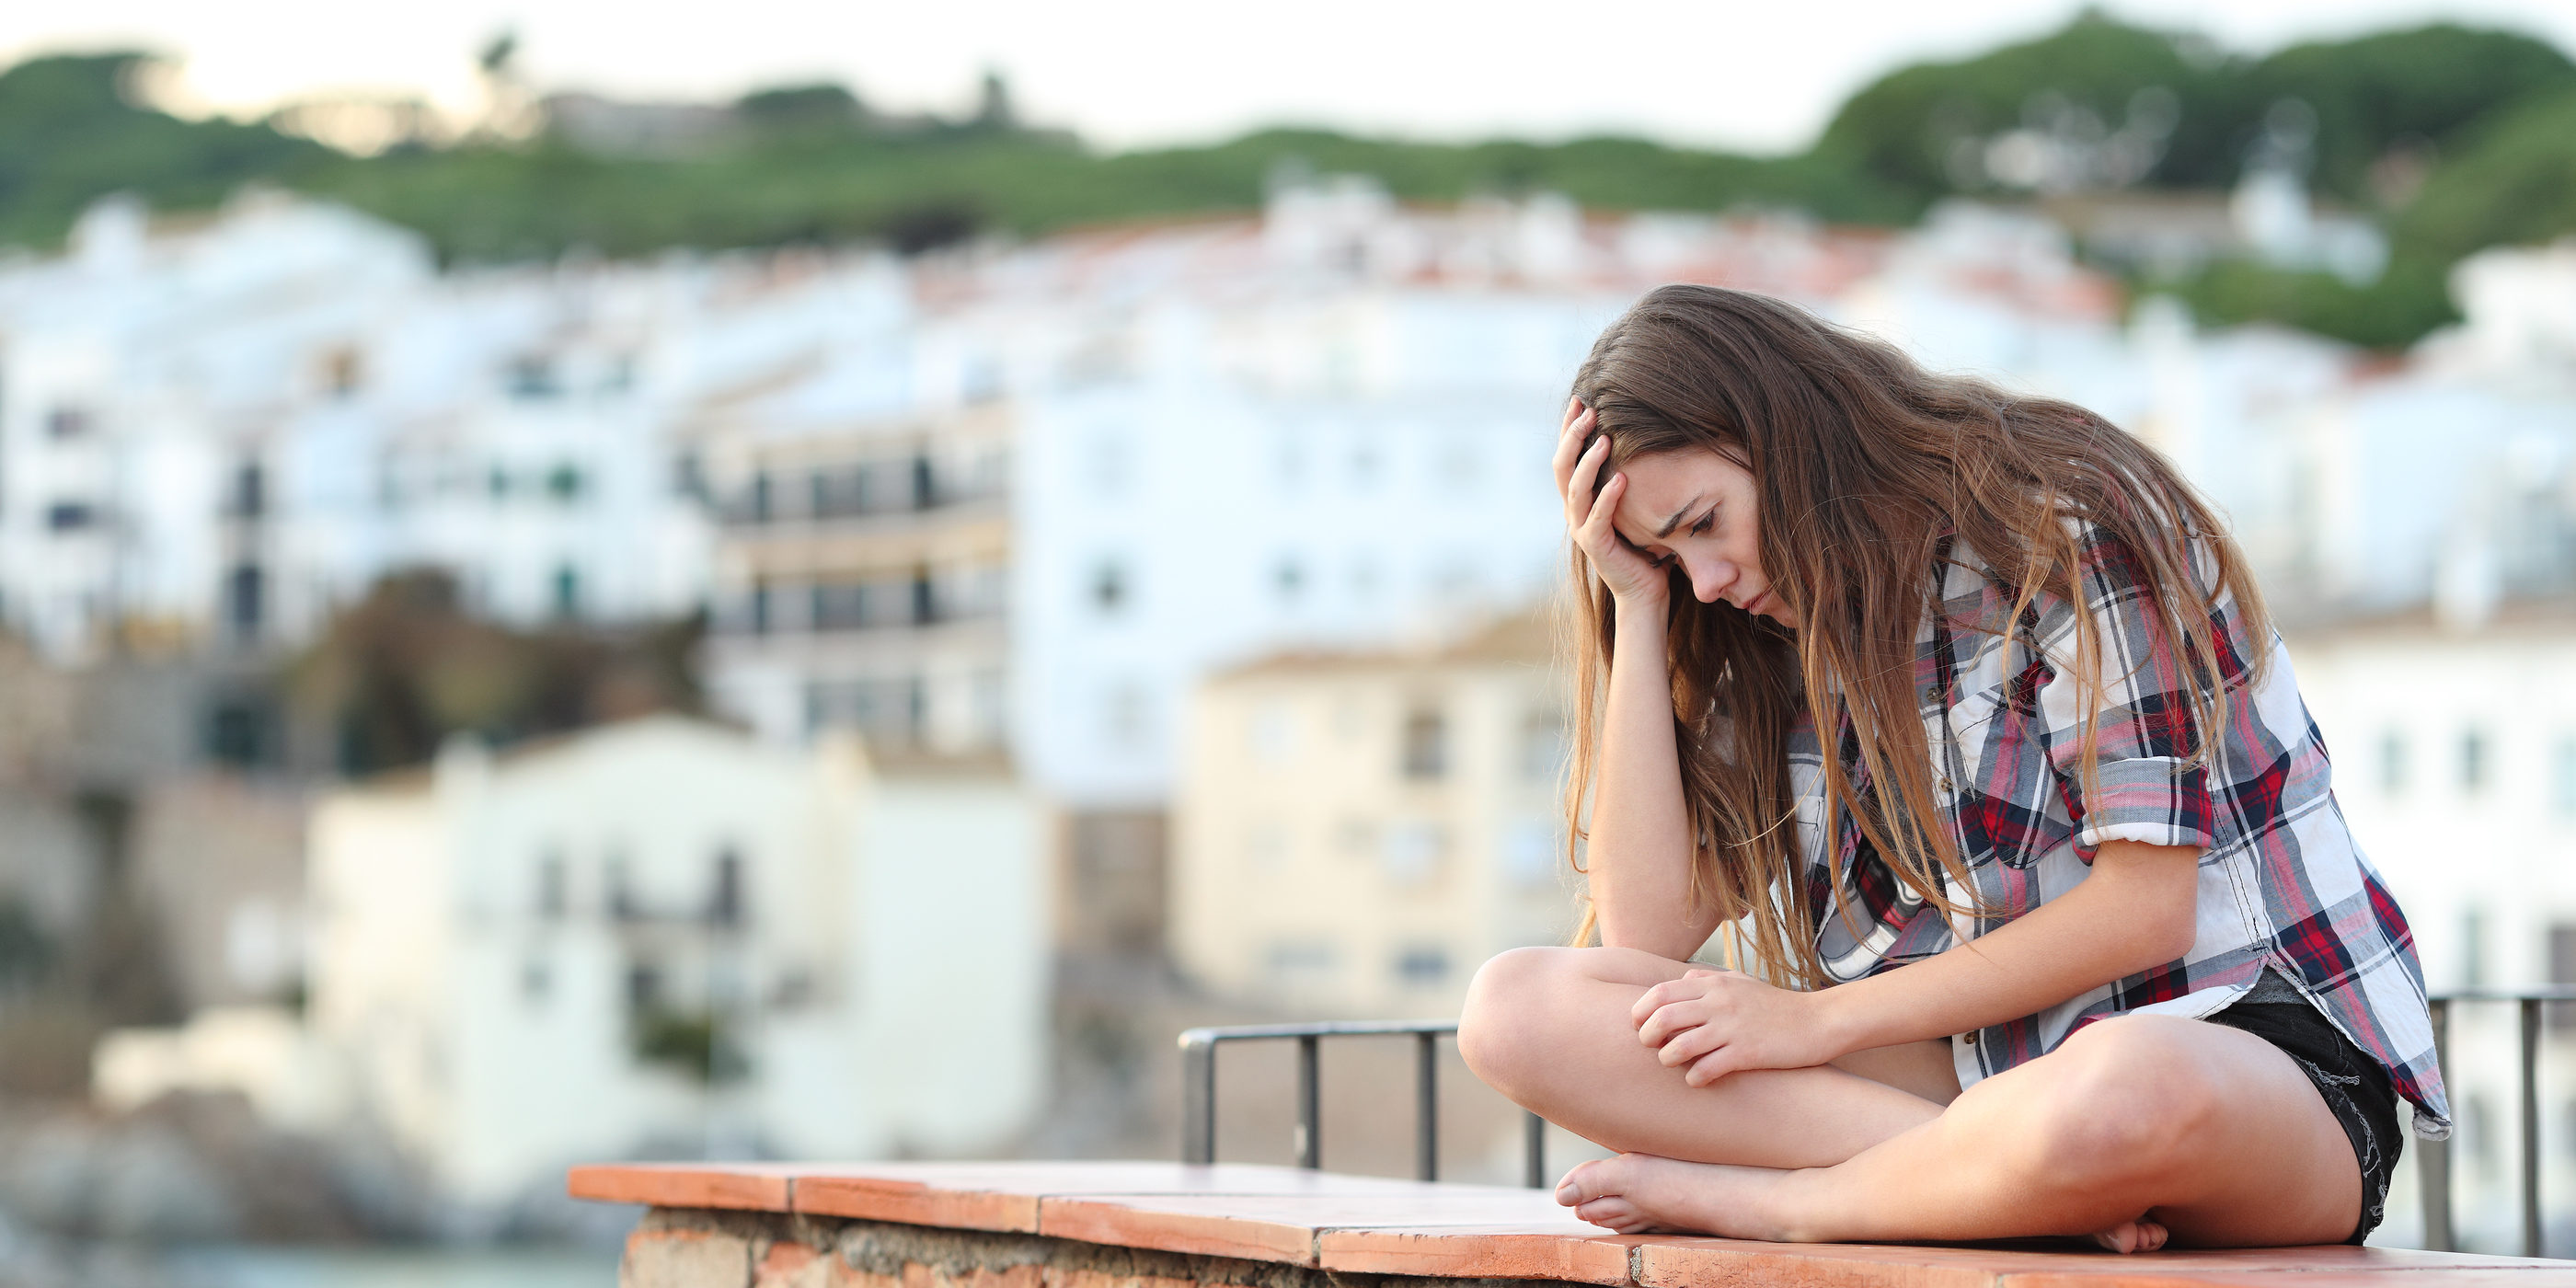 Teen sitting on ledge fighting opioid addiction and feel depressed and isolated